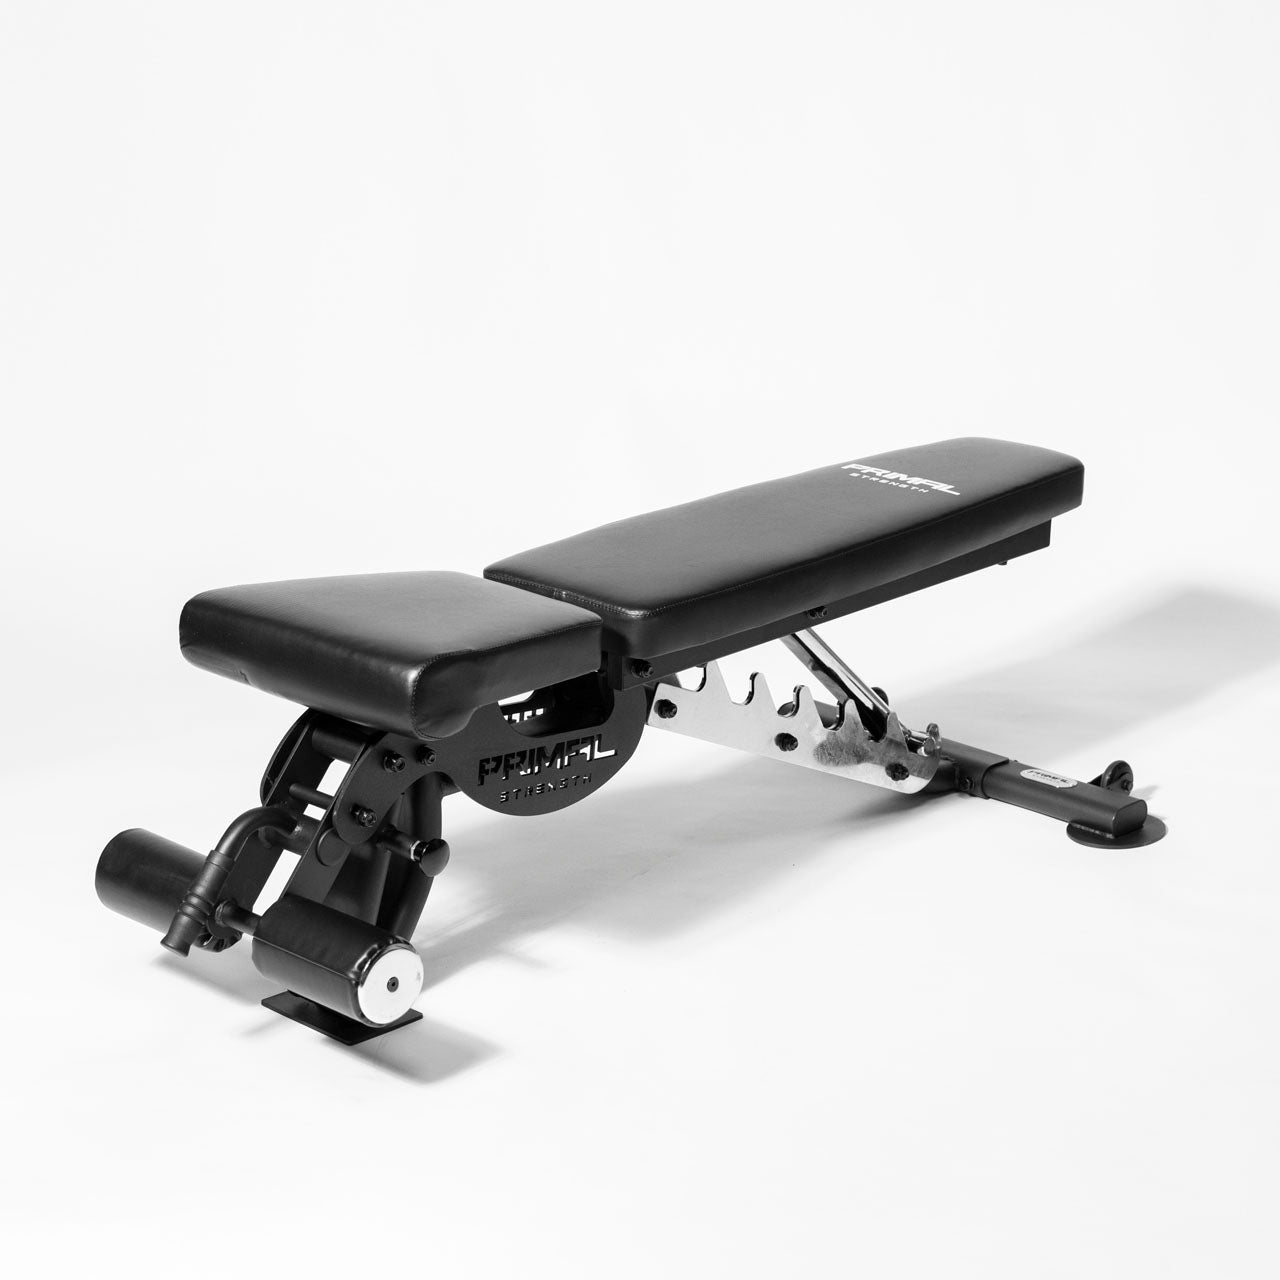 Signatures Series Multi-Adjustable Bench - Outlet